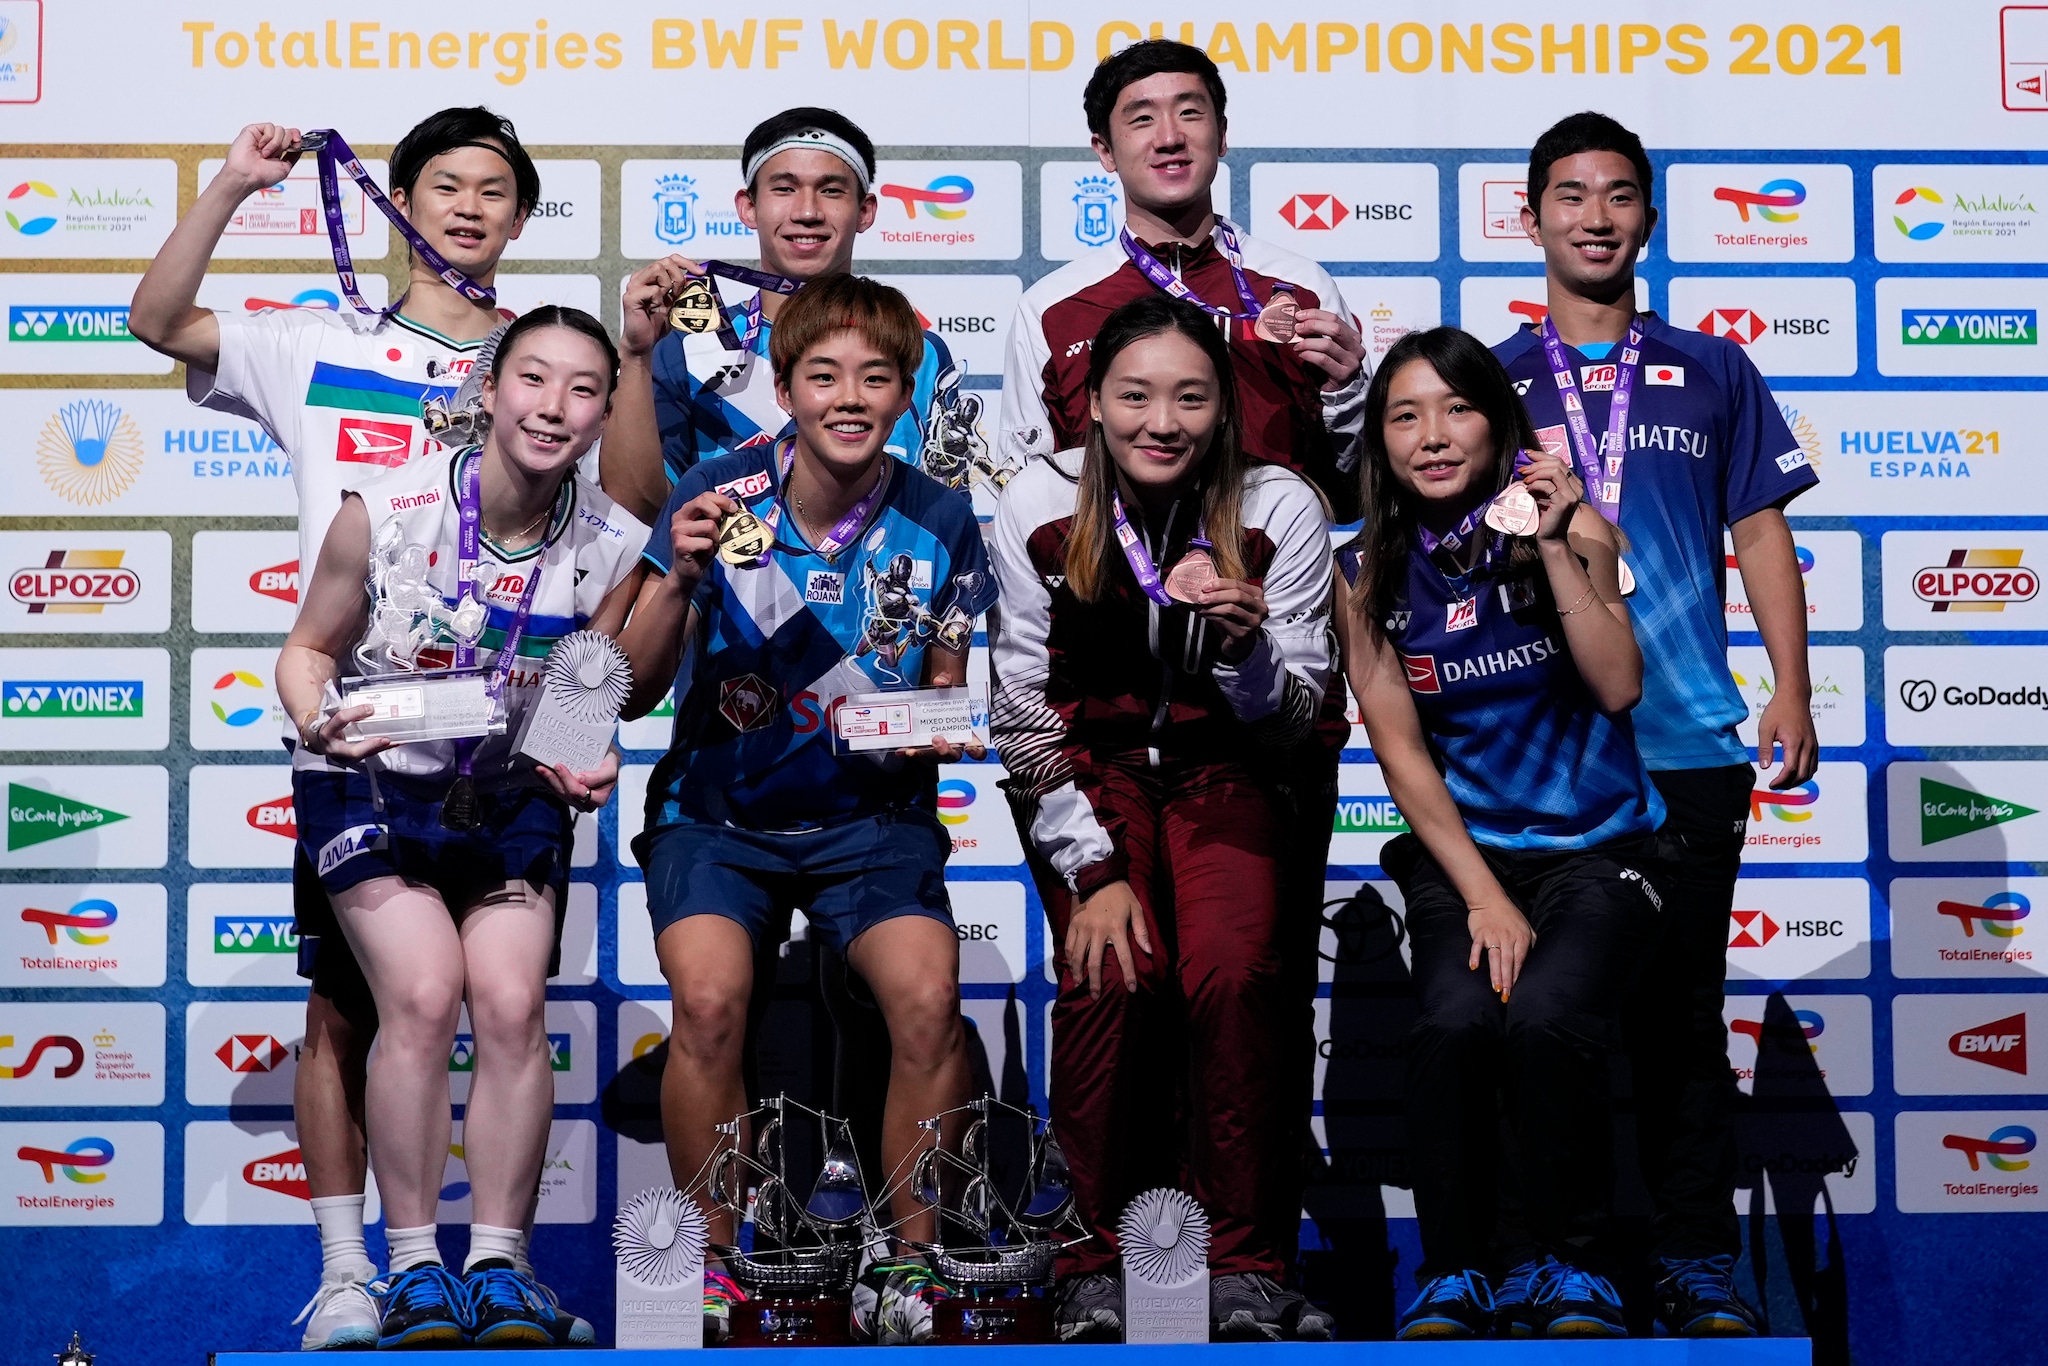 BWF World Championships 2021 in Pictures Meet The Medallists